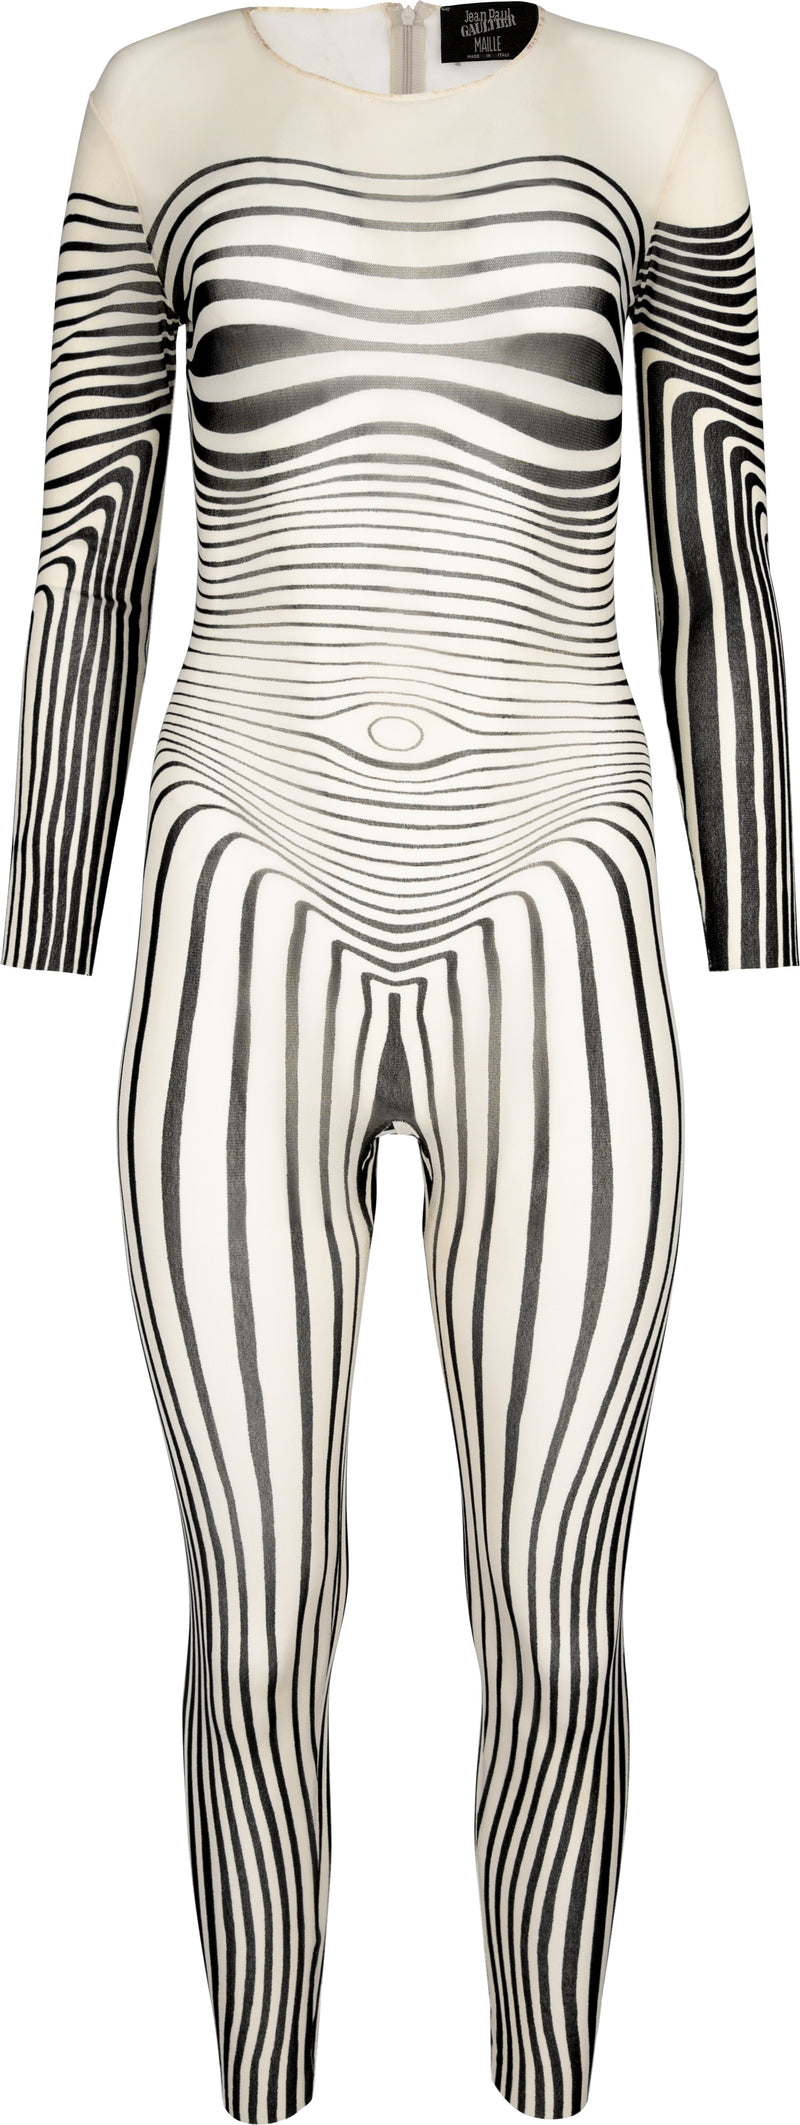 Jean Paul Gaultier Spring 1996 Cyberbaba Maille Jumpsuit